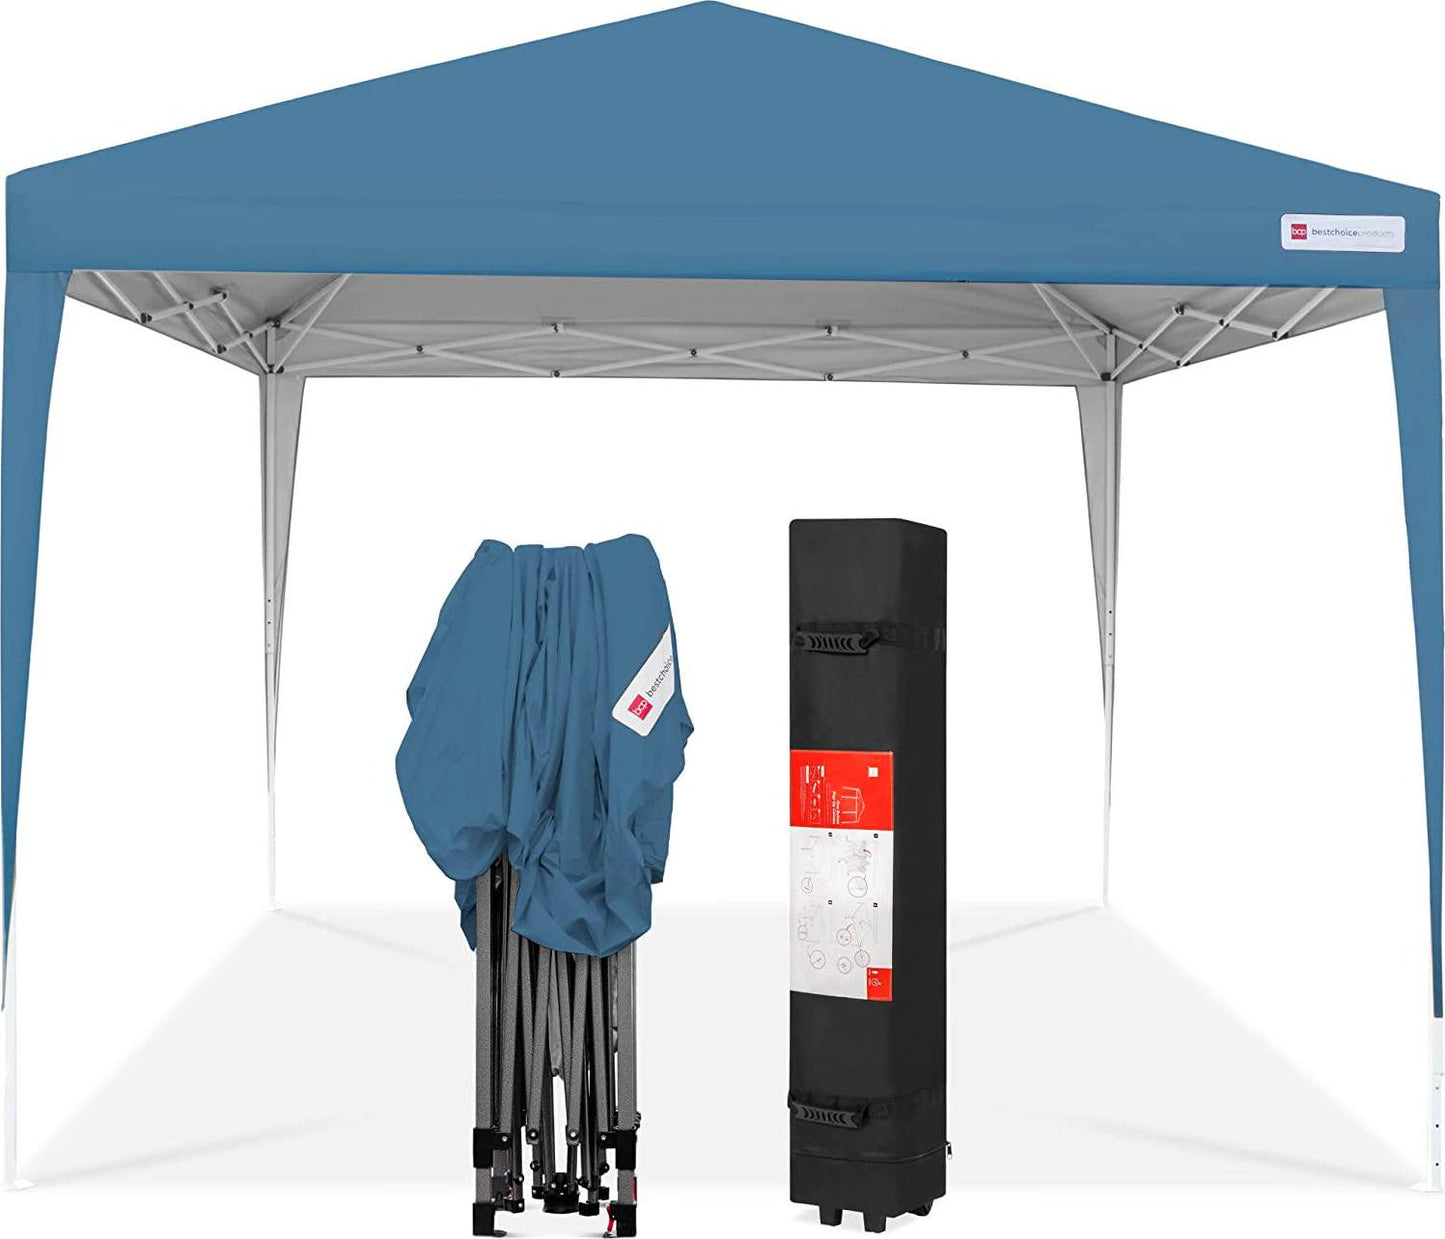 Best Choice Products 10x10ft Pop Up Canopy Outdoor Portable Folding Instant Lightweight Gazebo Shade Tent w/Adjustable Height, Wind Vent, Carrying Bag - Blue-